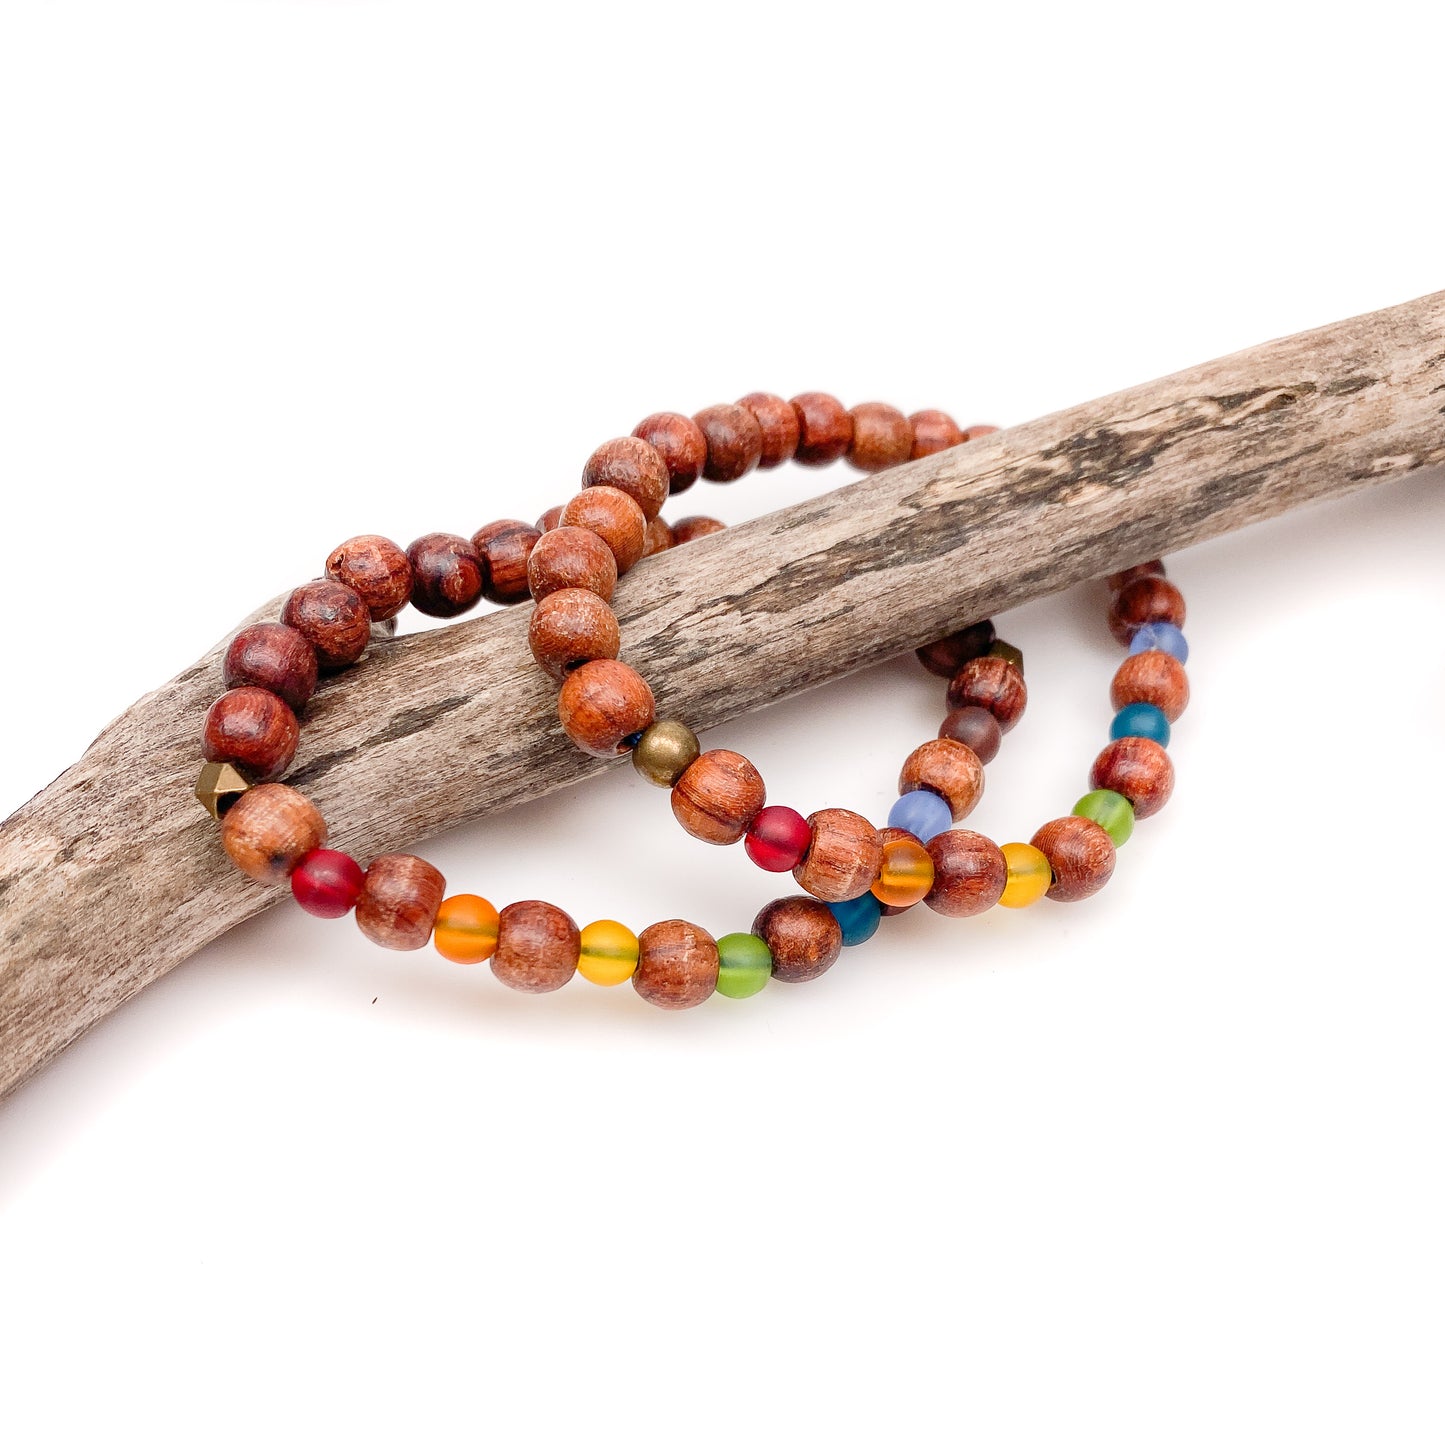 Rainbow Chakra Wood and Recycled Glass Stretchy Cord Bracelet - 3 sizes